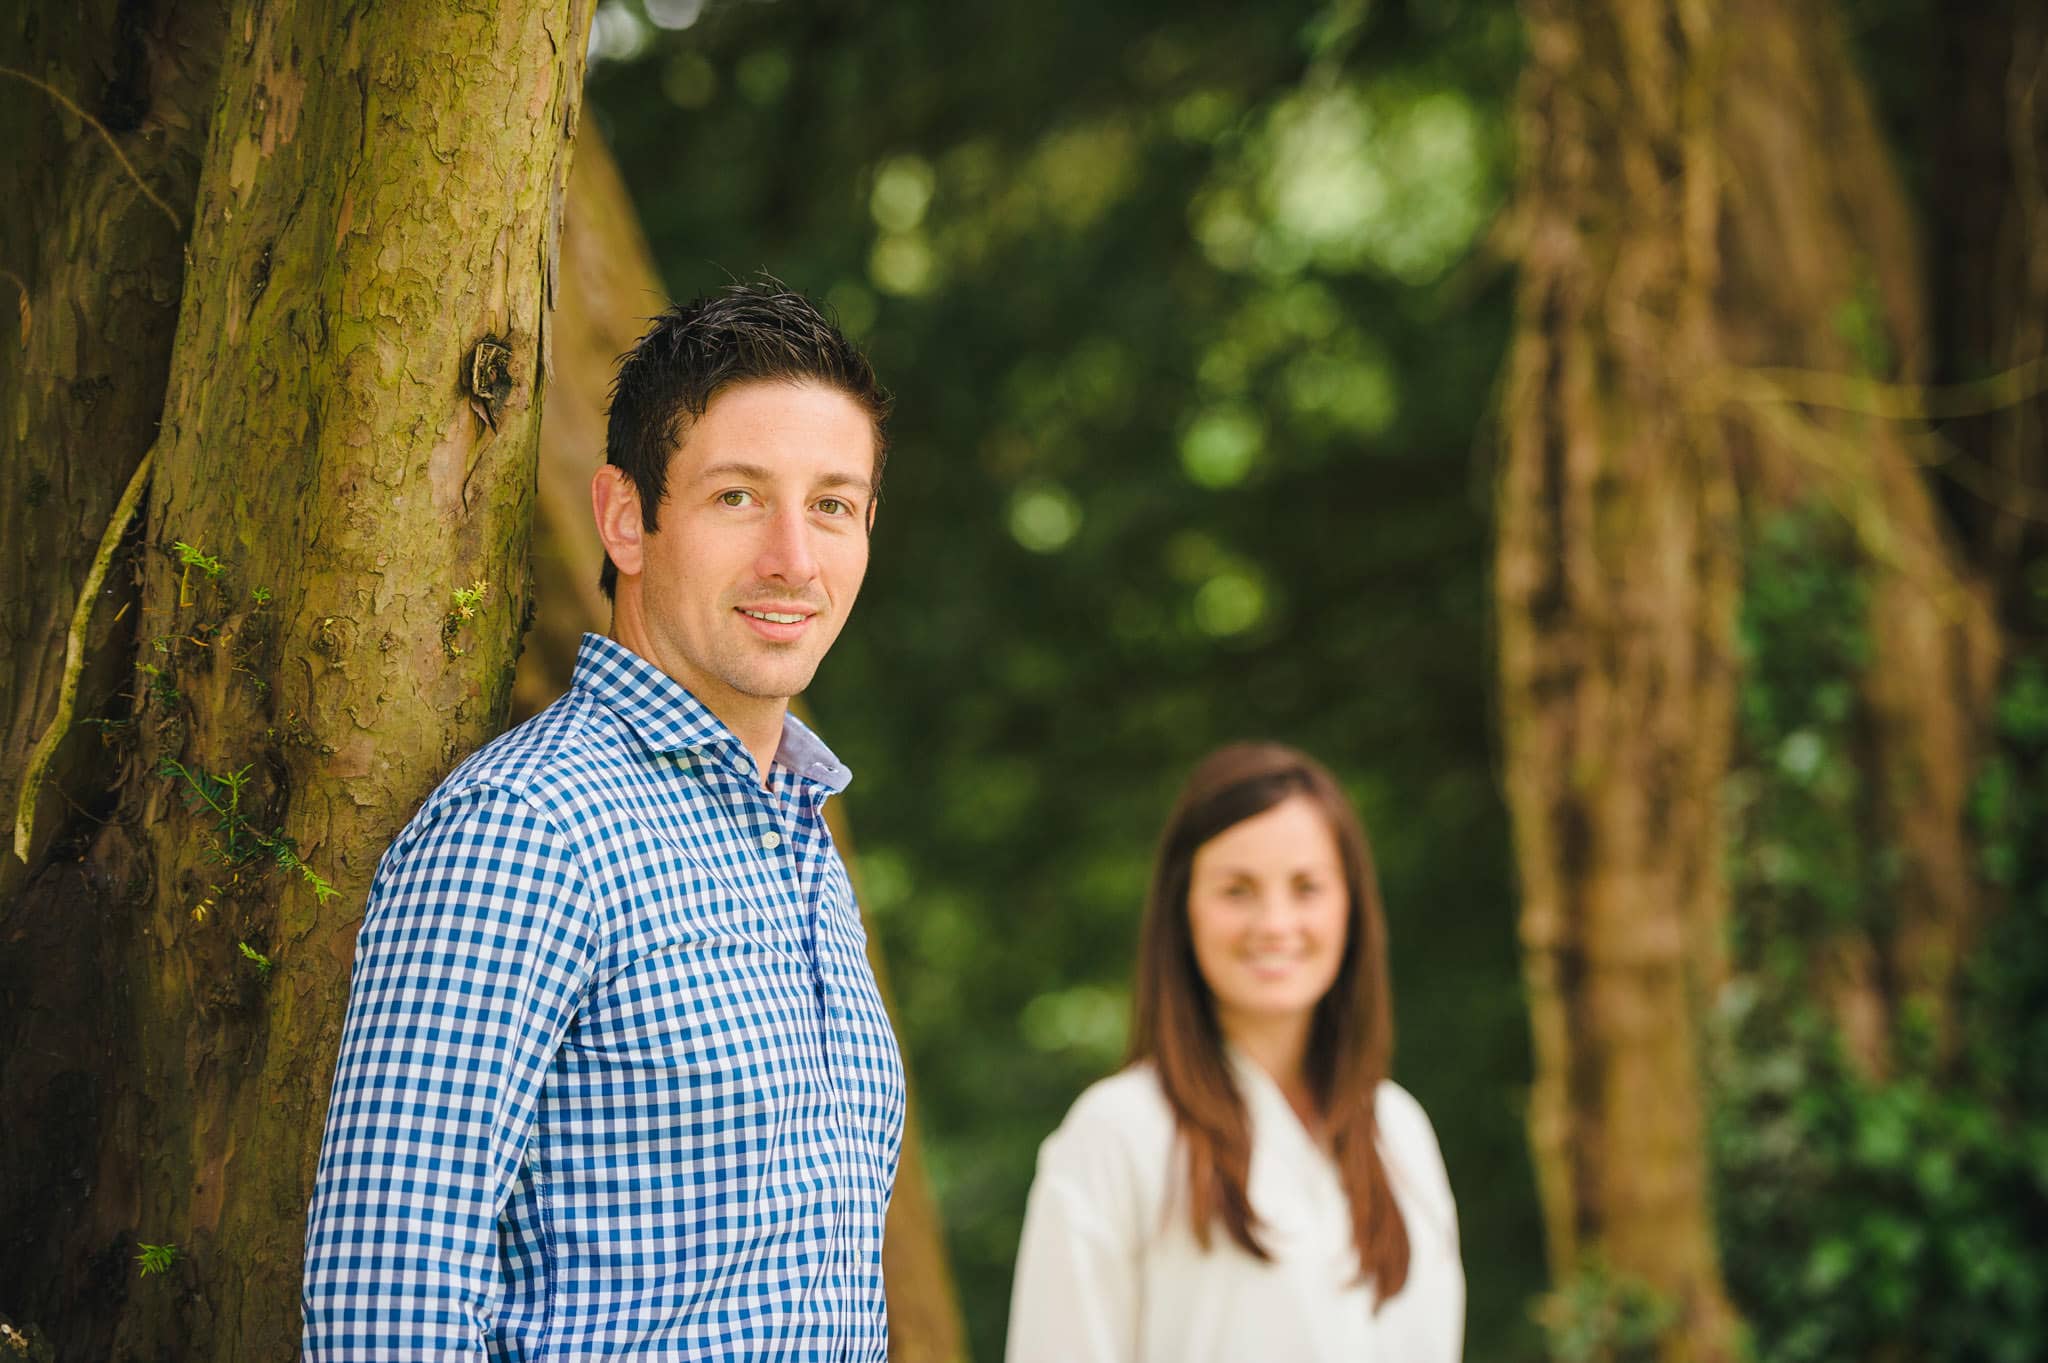 Dean + Sarah's pre wedding photography session in Herefordshire, West Midlands 4